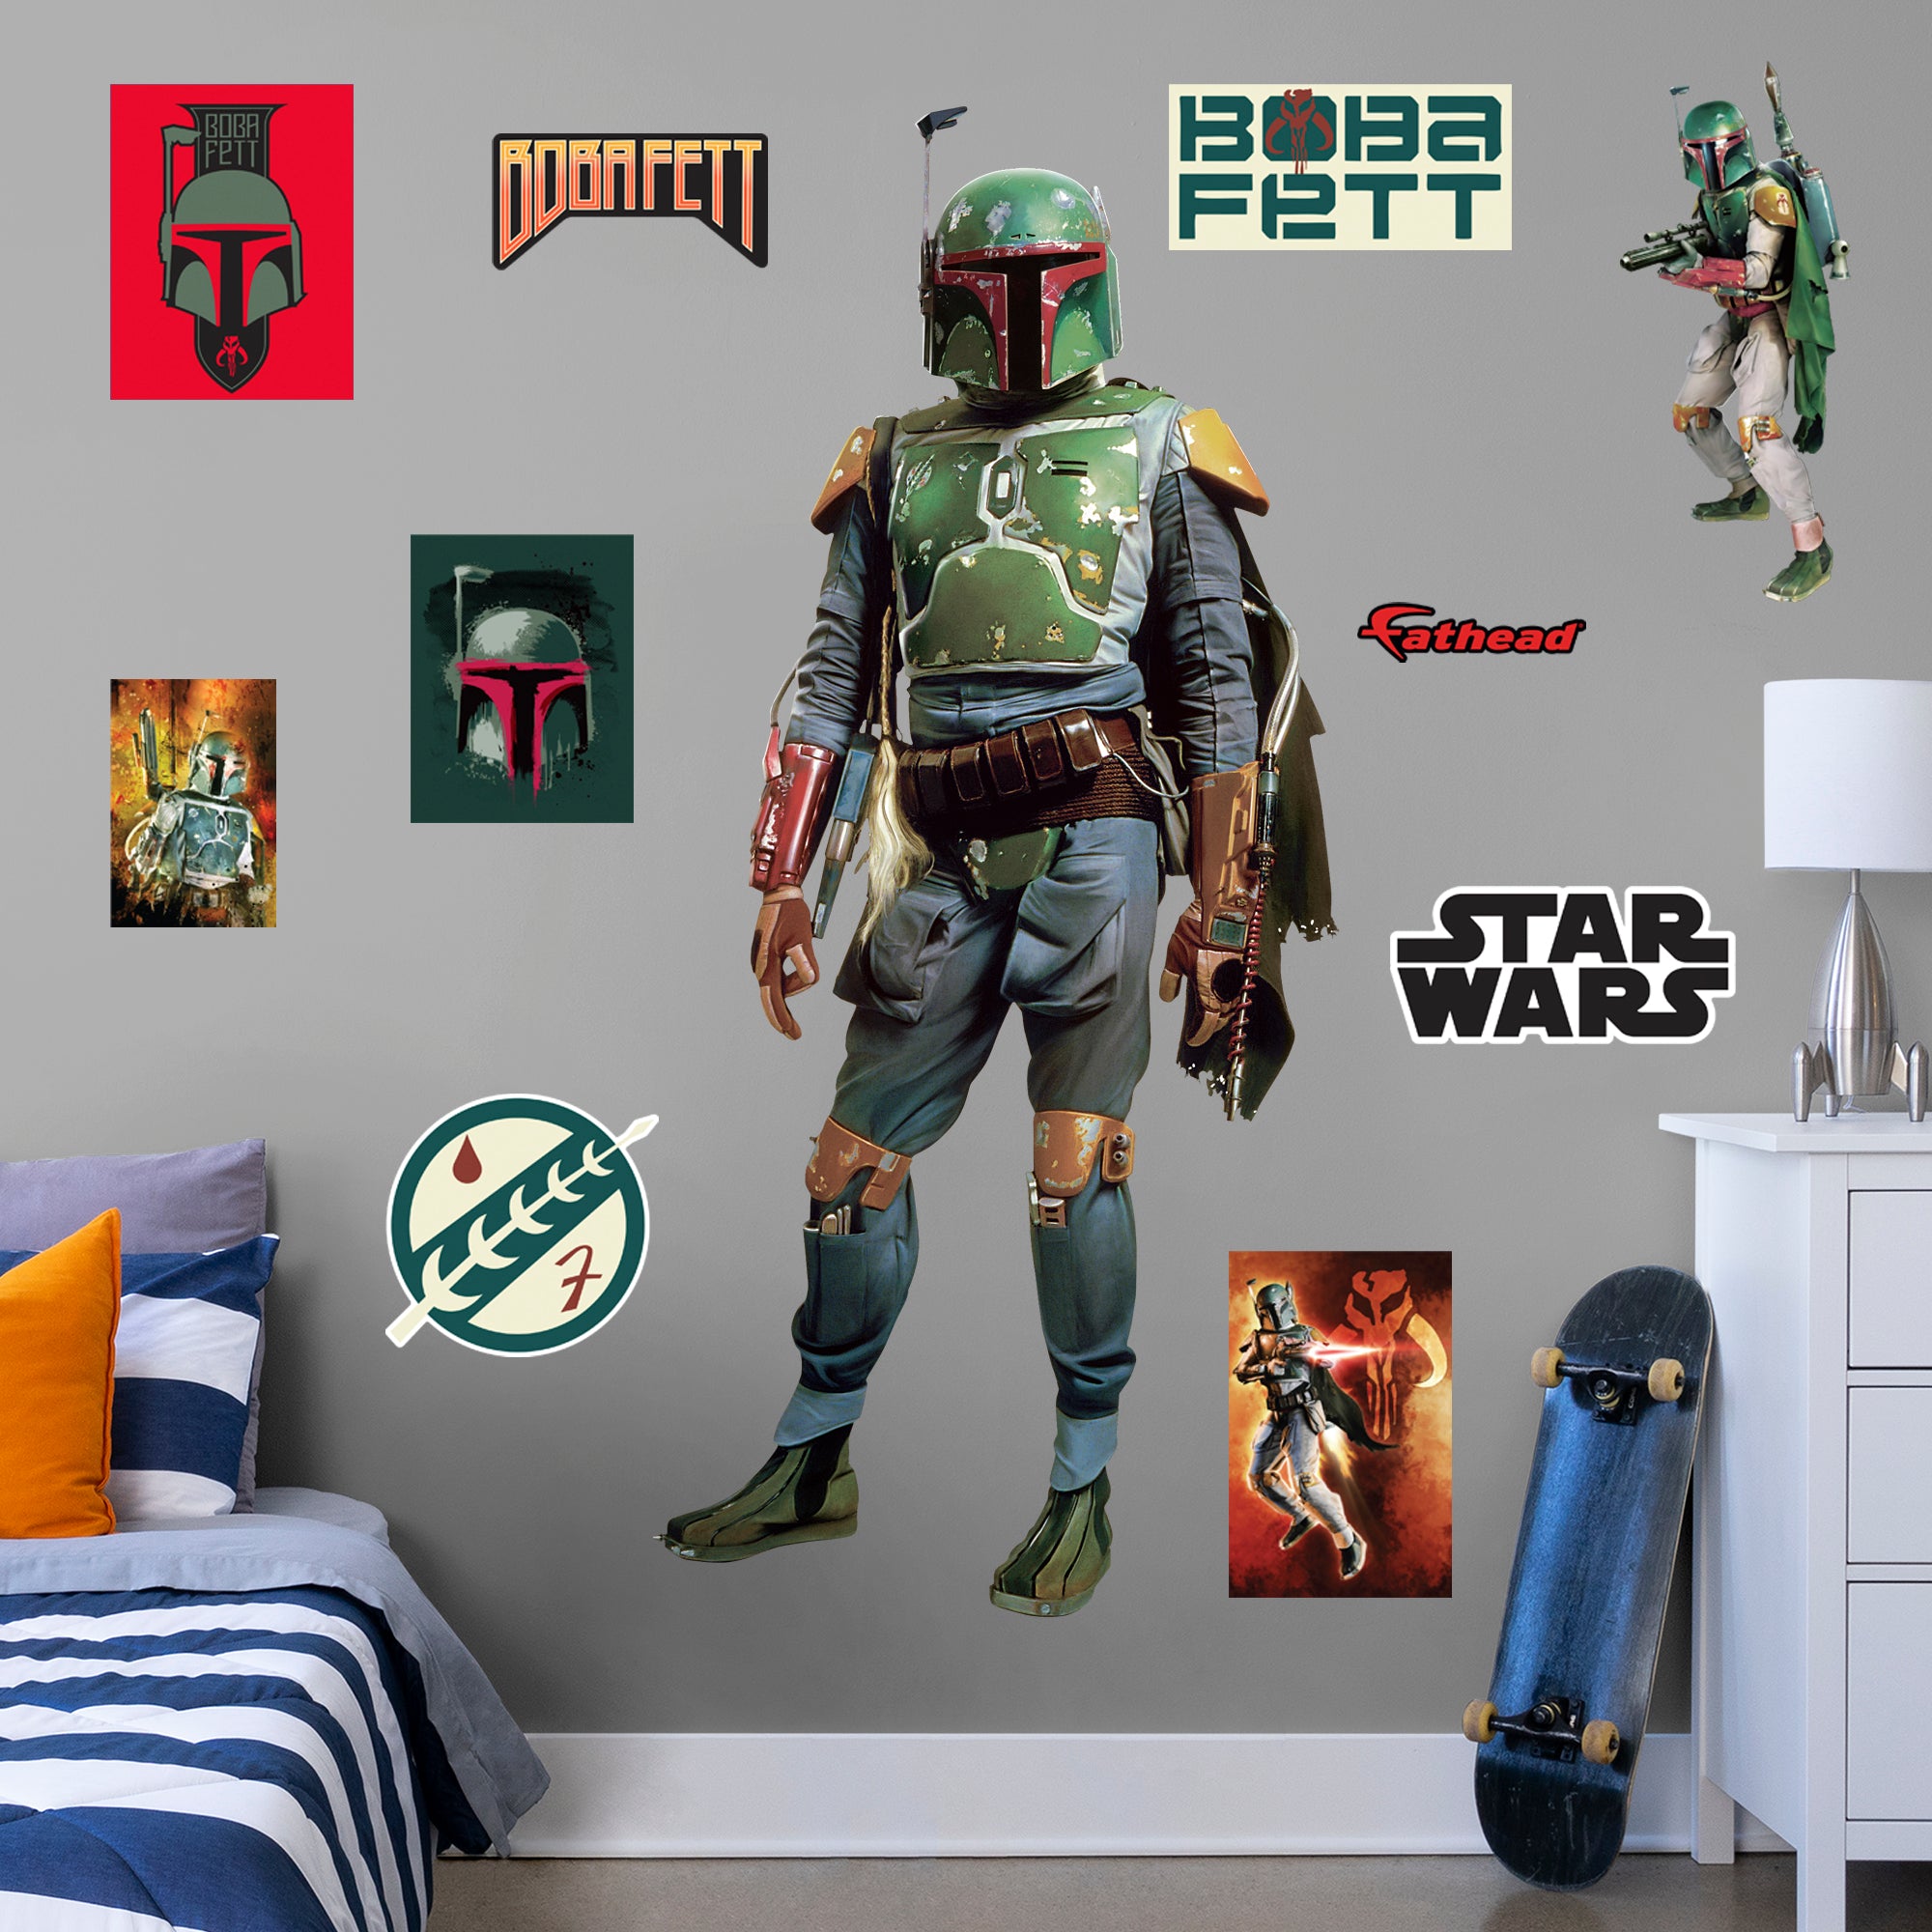 Boba Fett 2020 - Officially Licensed Star Wars Removable Wall Decal Life-Size Character + 9 Decals (78"W x35"H) by Fathead | Vin